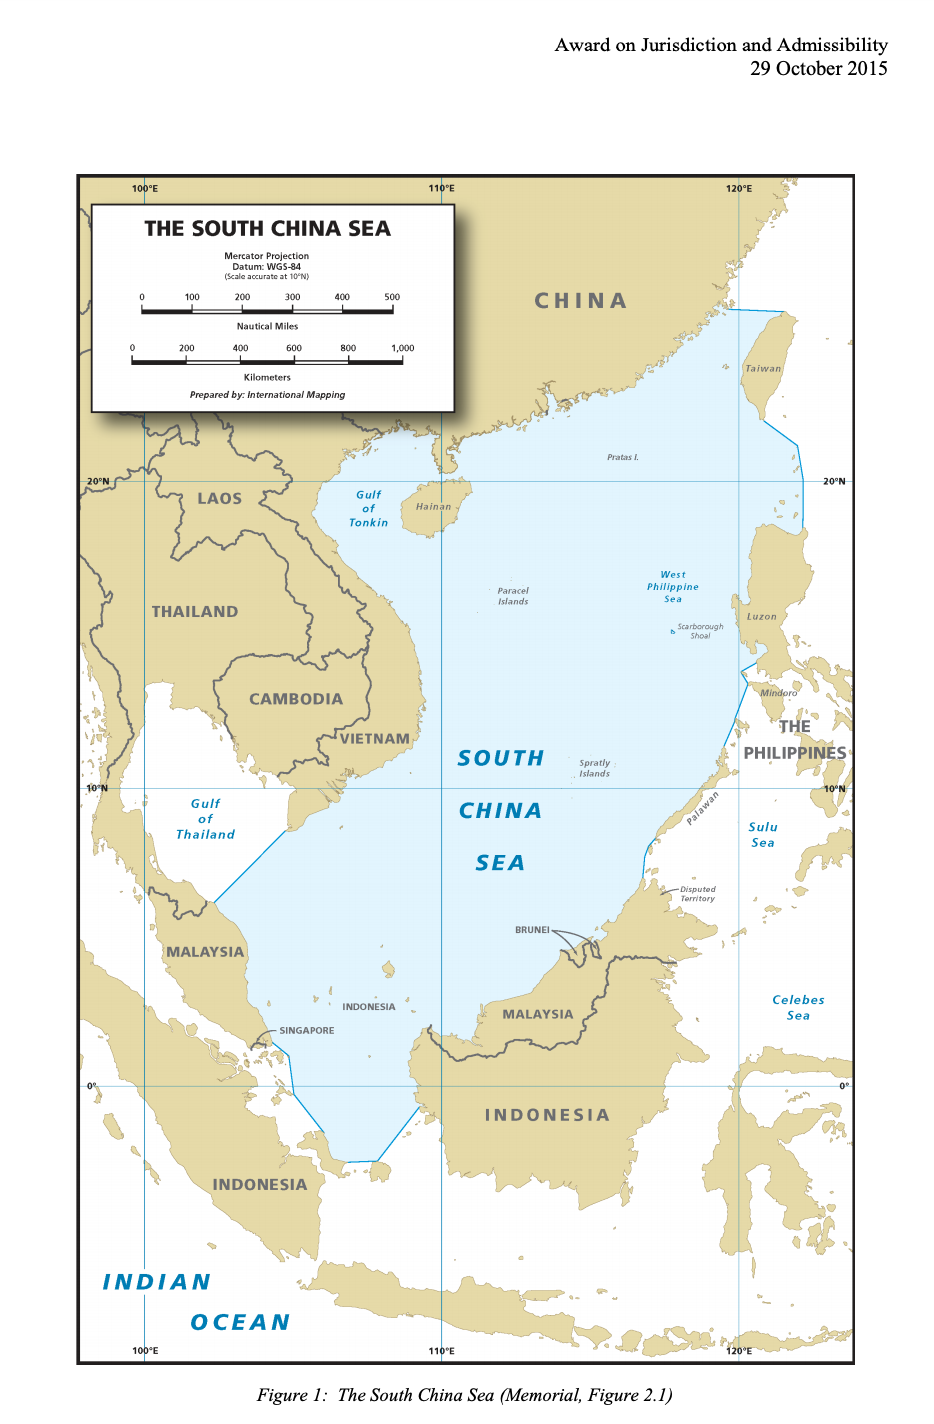 The South China Sea: Award on Jurisdiction and Admissibility, 29 October 2015